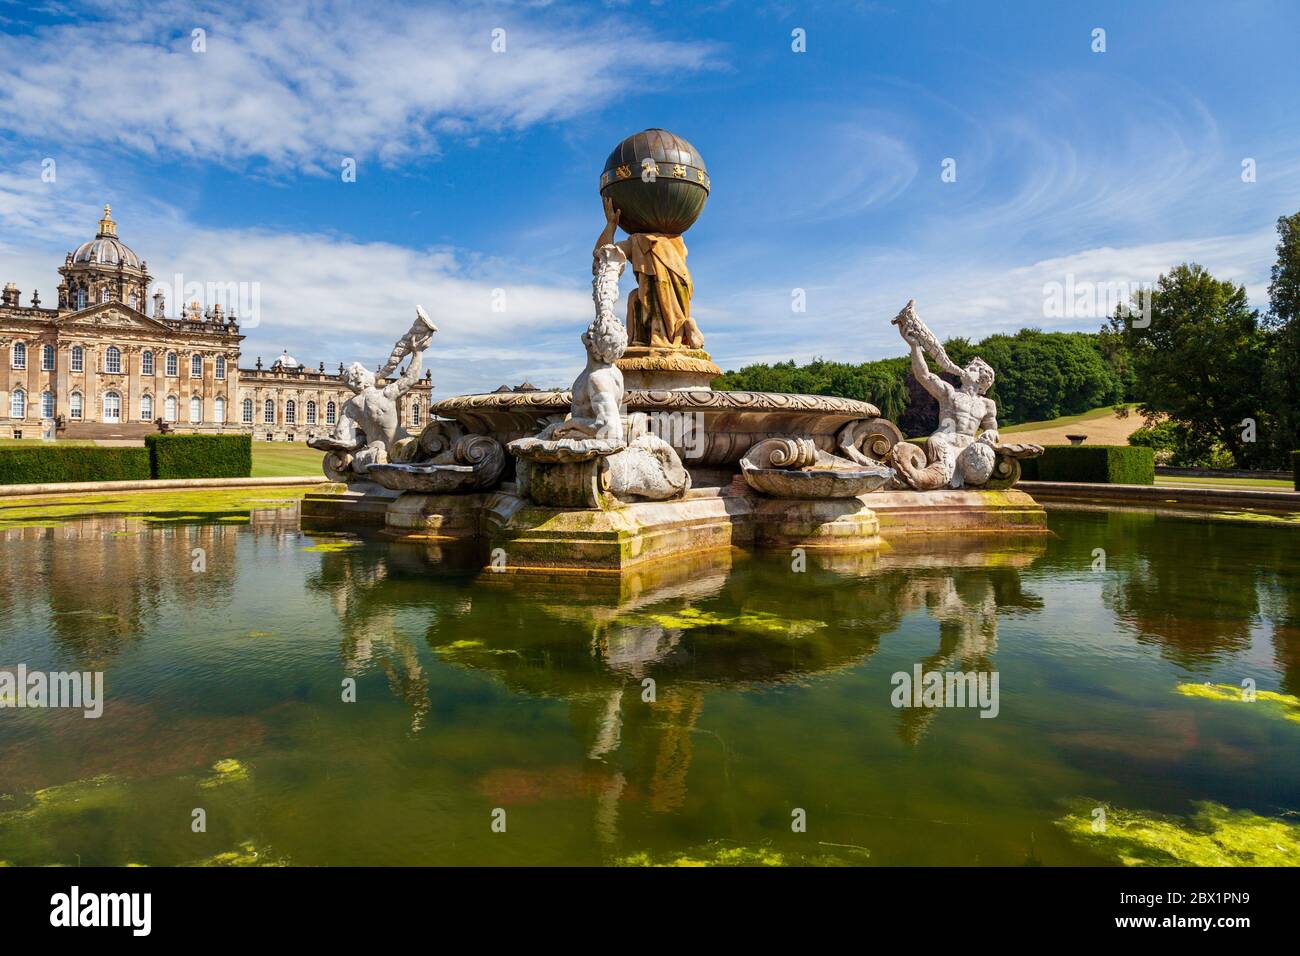 The Atlas Fountain with Castle Howard in the background, Yorkshire, England Stock Photo